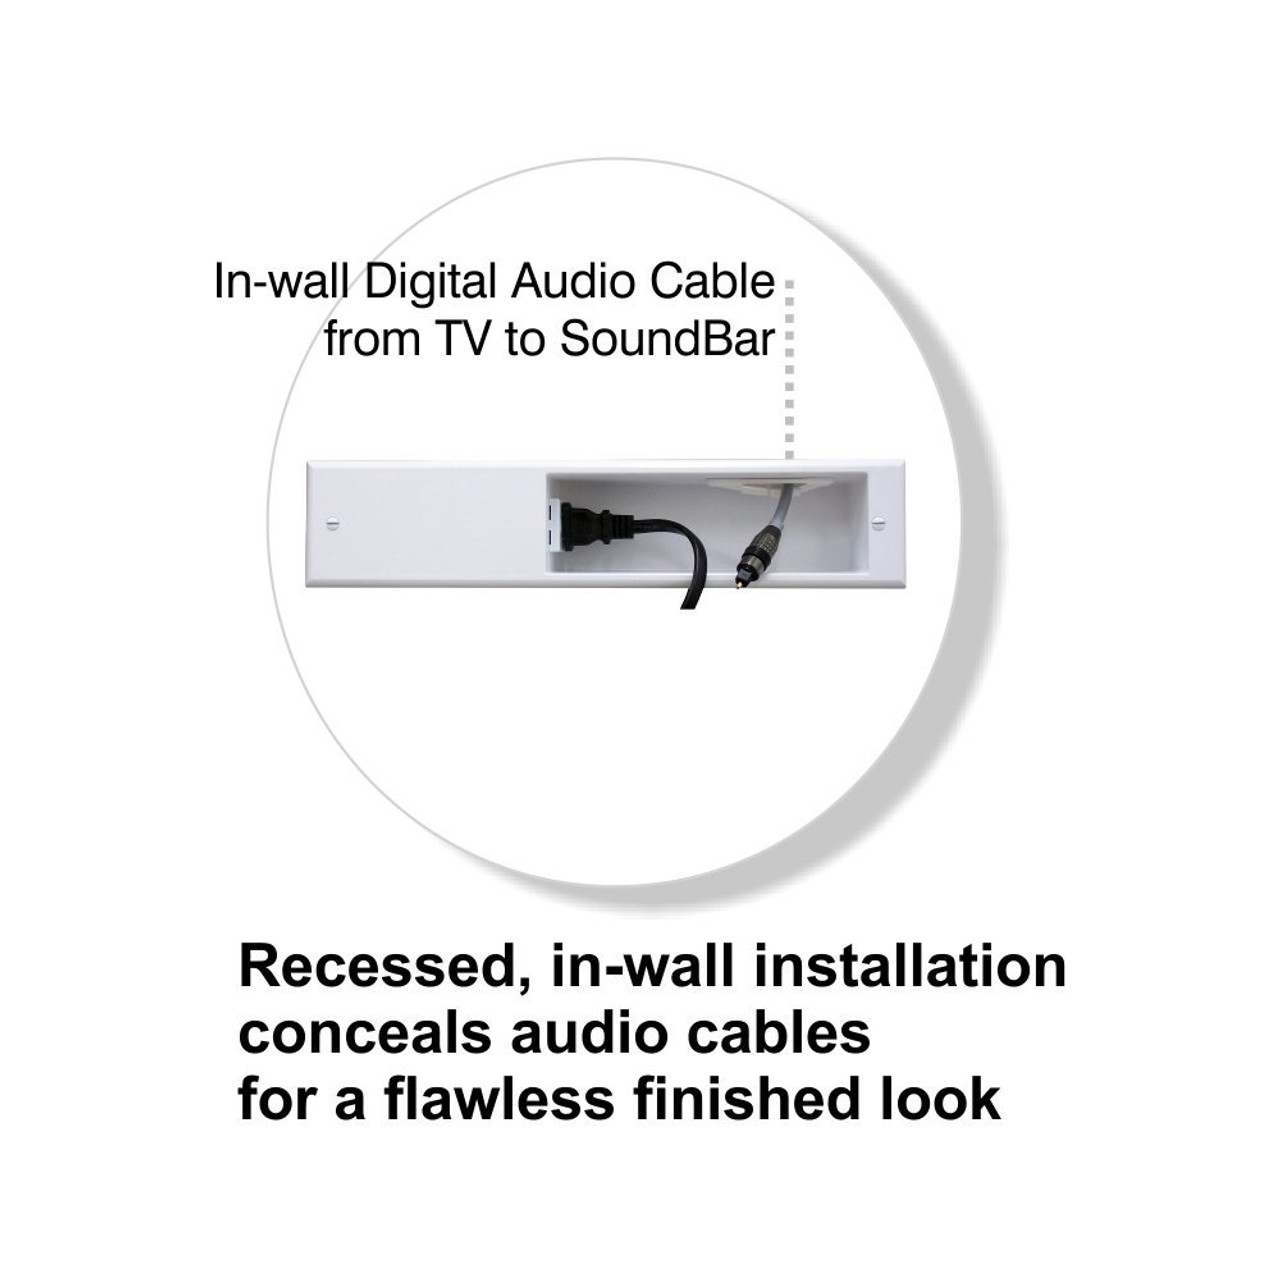 https://cdn11.bigcommerce.com/s-bd95c/images/stencil/1280x1280/products/2769/4294/PowerBridge_Solutions_SBCK_Cable_Management_System_for_Wall_Mounted_Soundbars_for_ONE_CK_and_TWO_CK_Power_Kits_example__20605.1393635812.jpg?c=2?imbypass=on